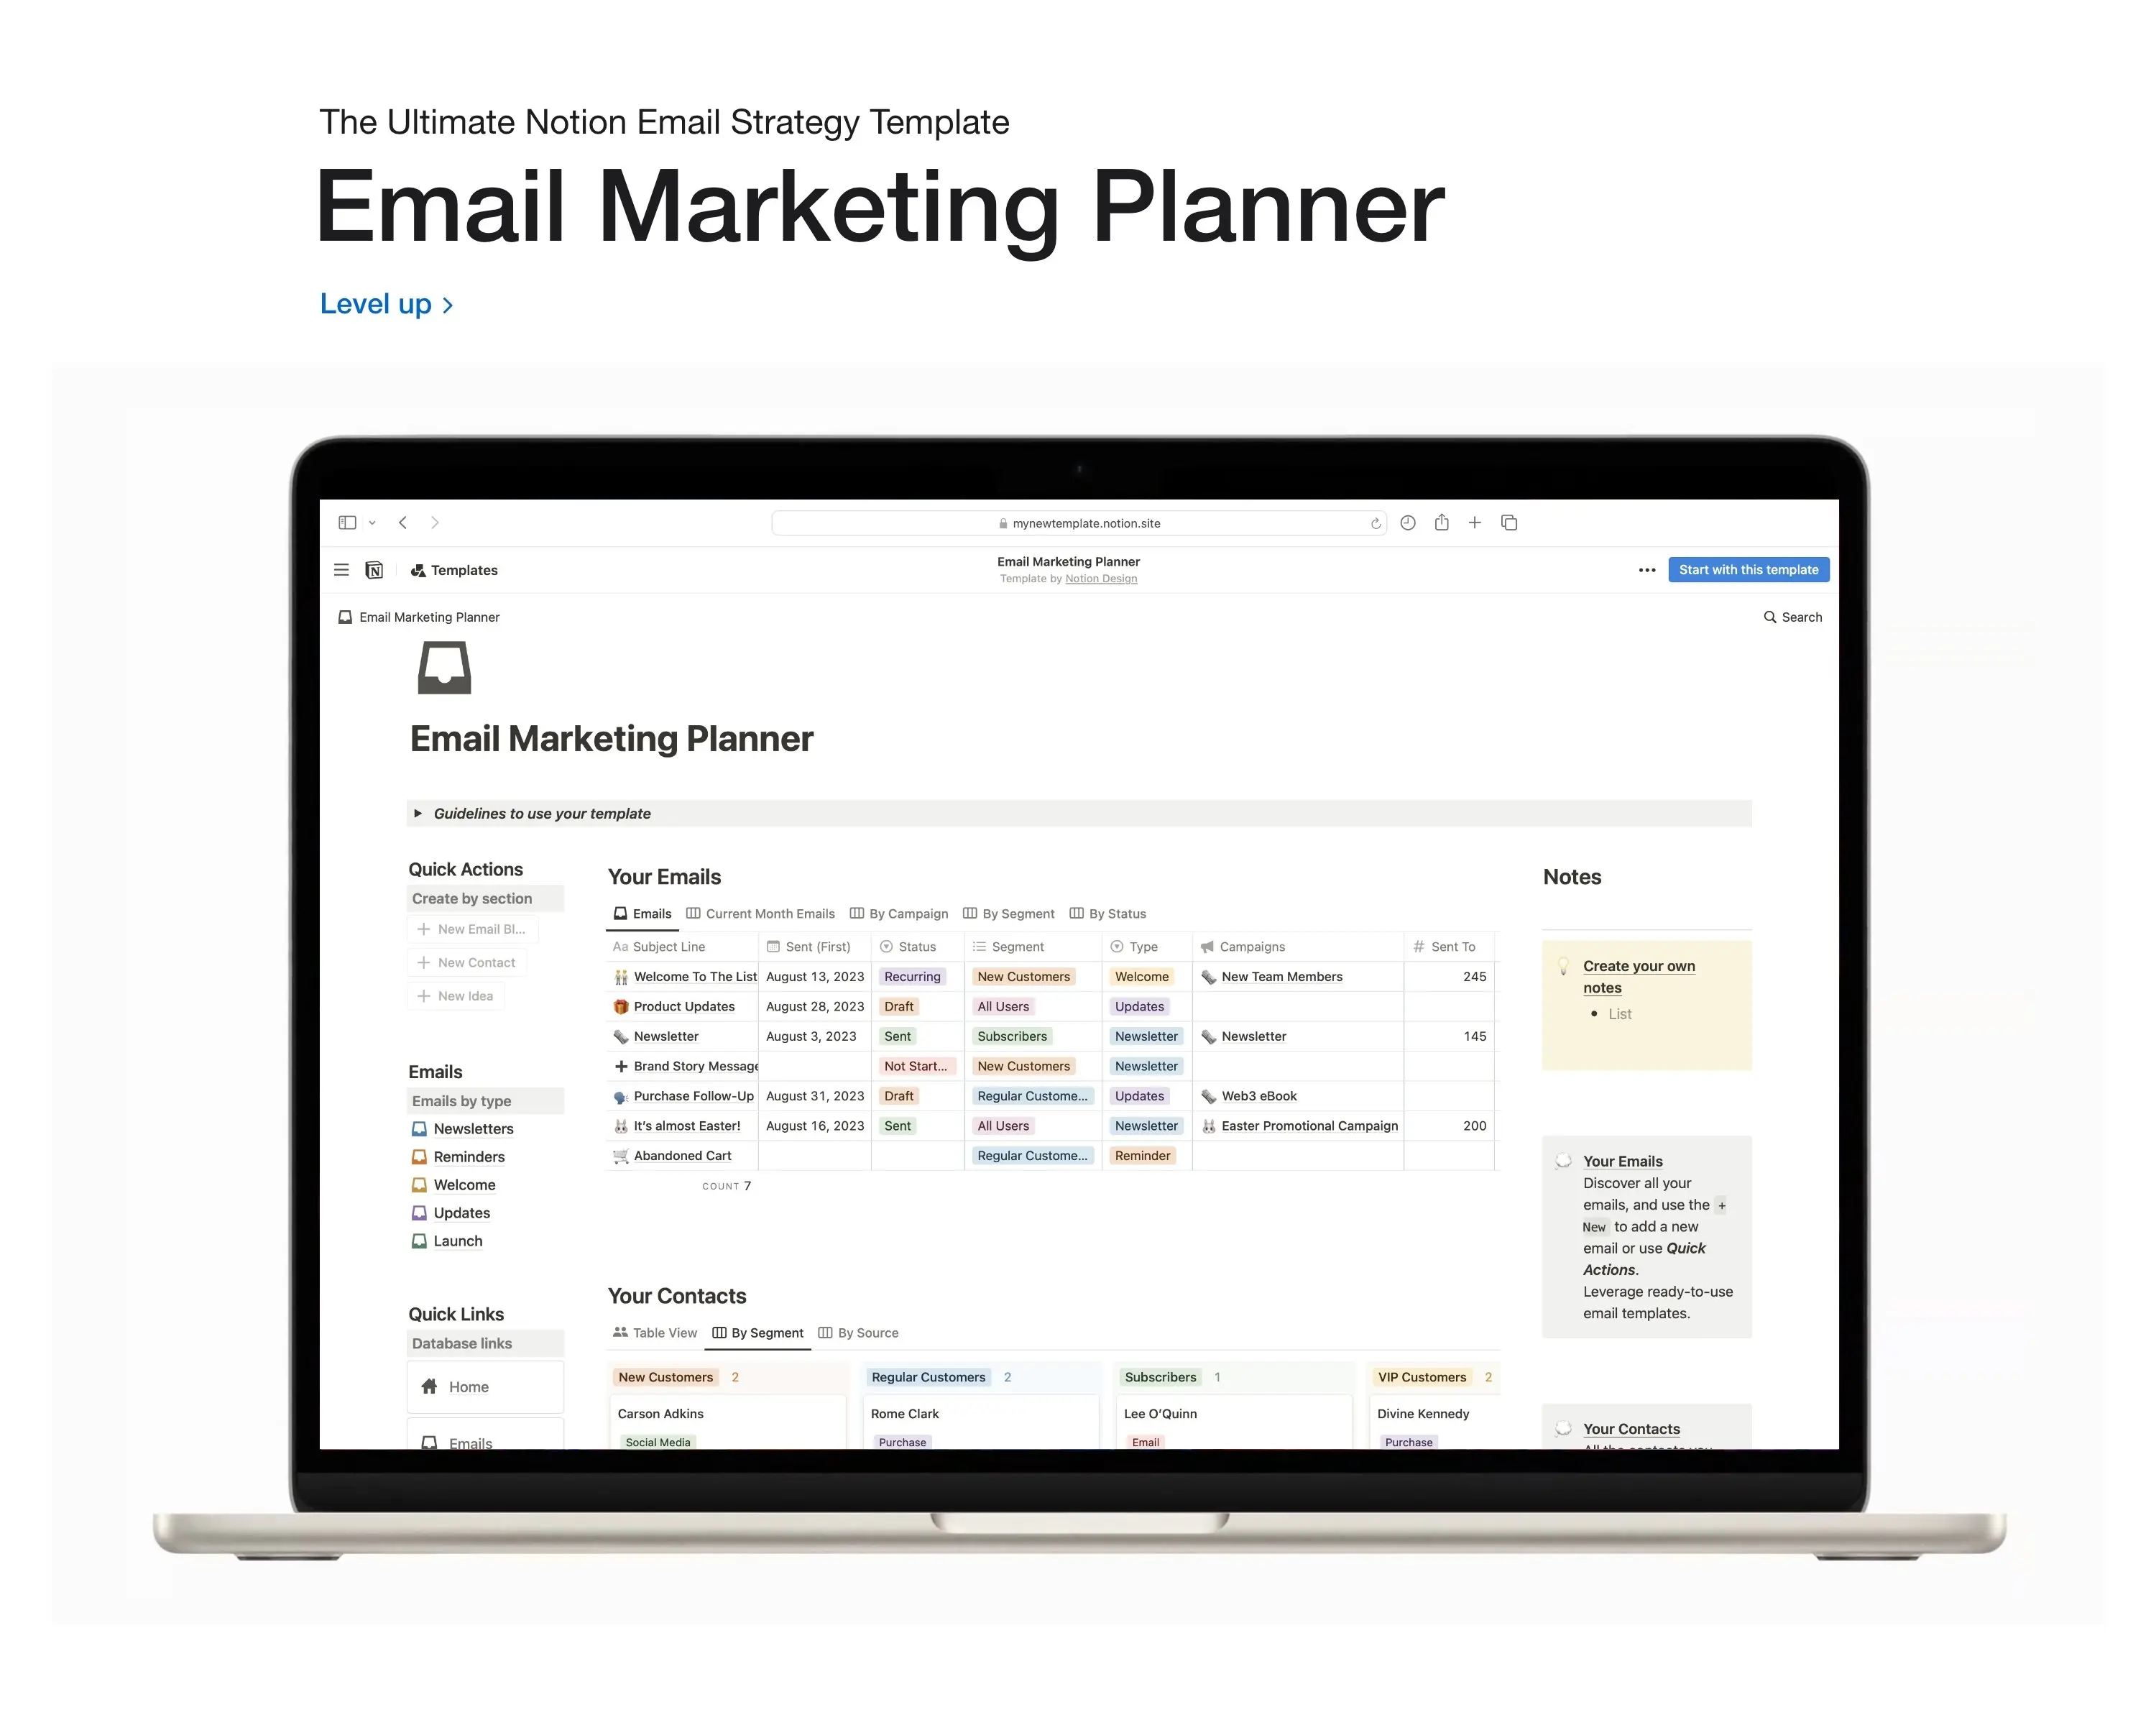 Email Marketing Planner image